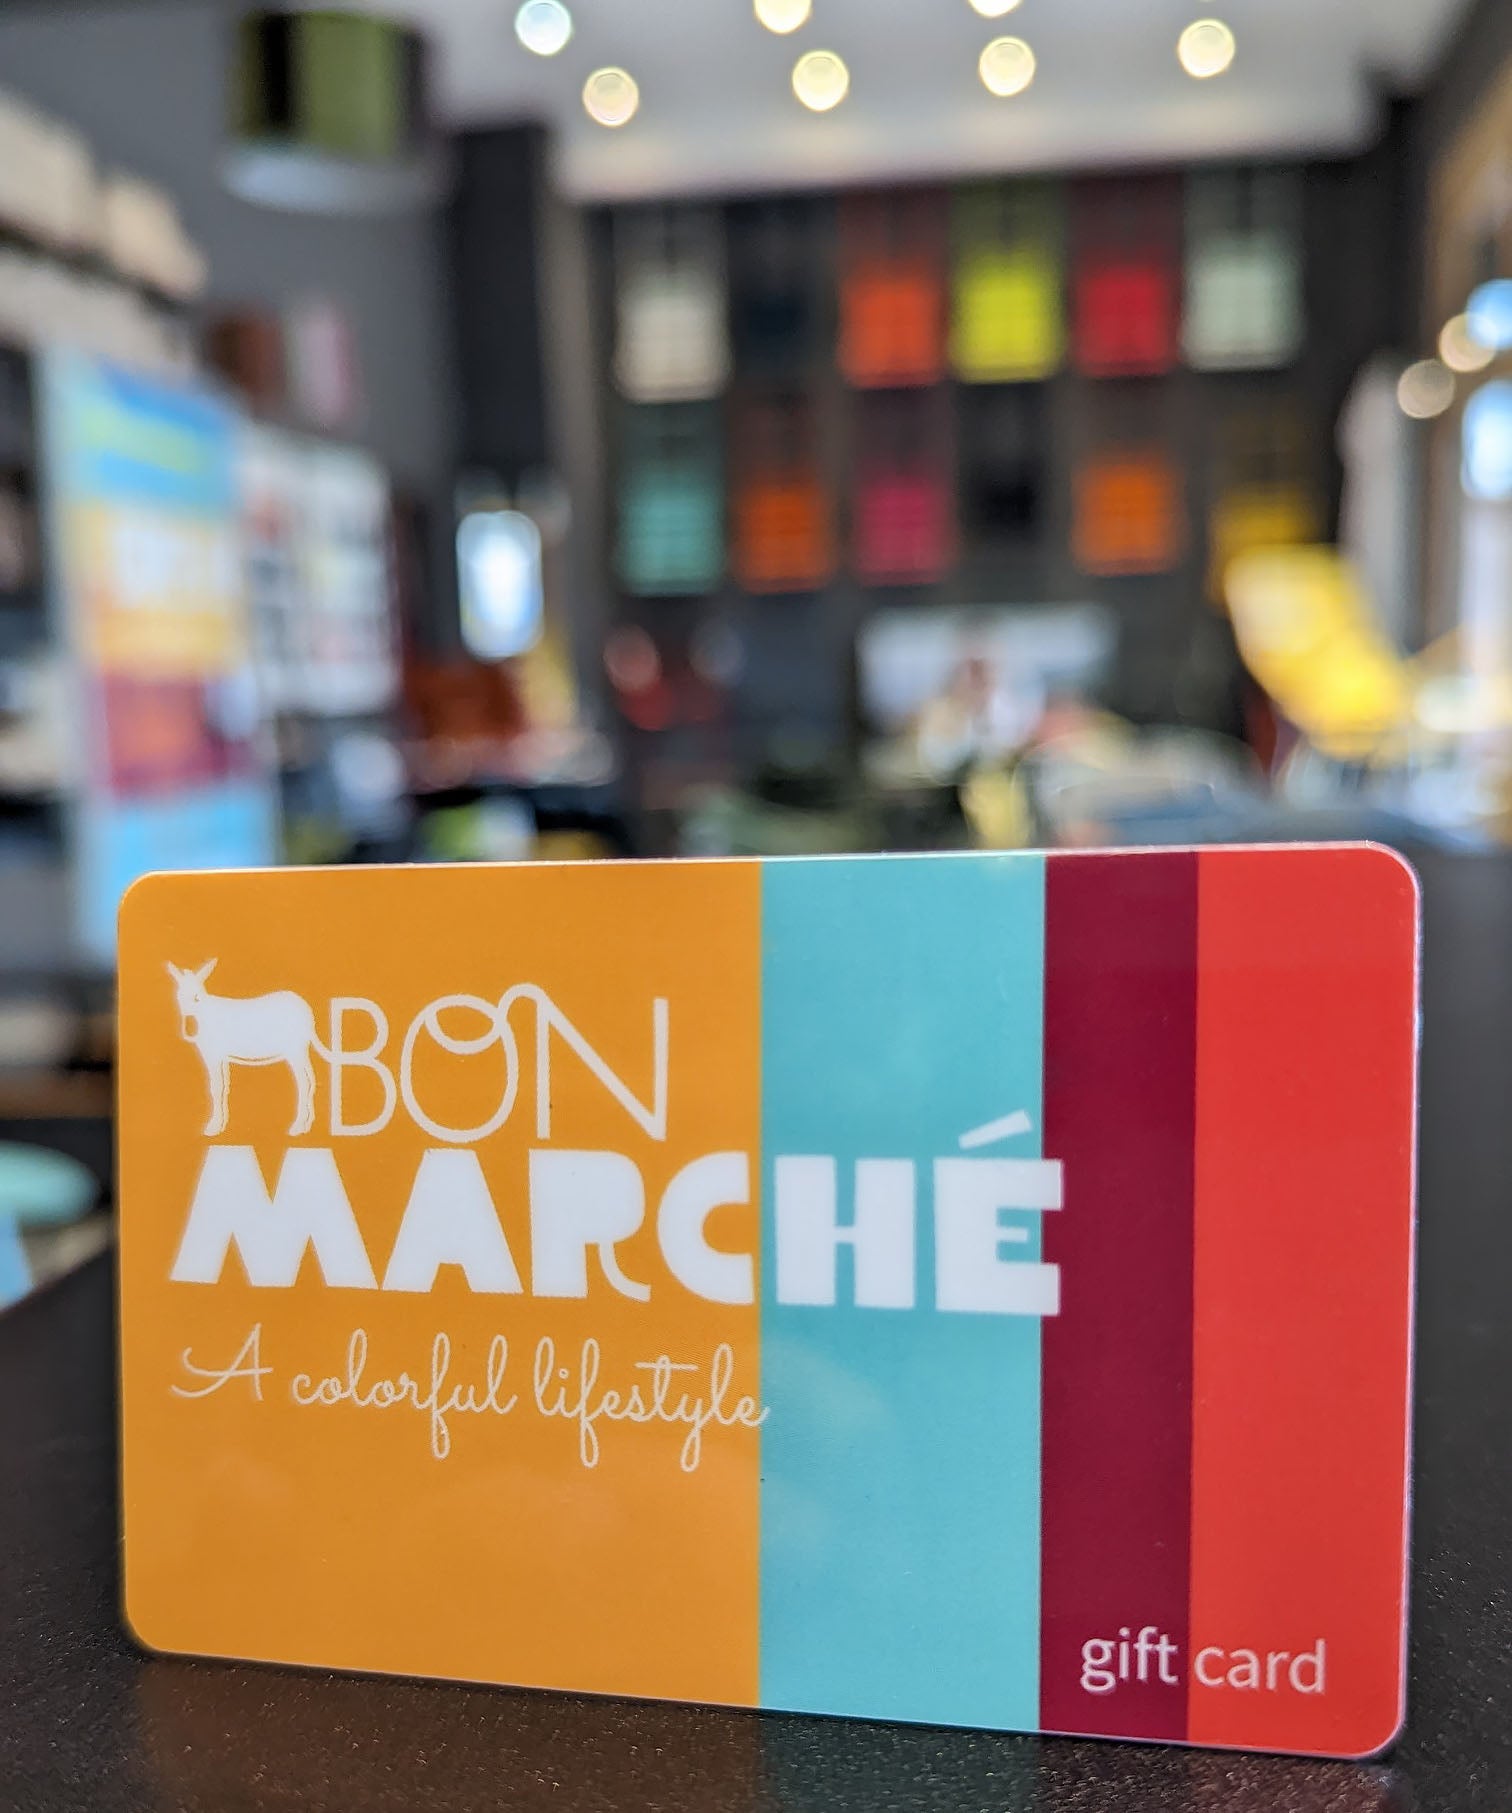 Bon Marche physical gift card in the store